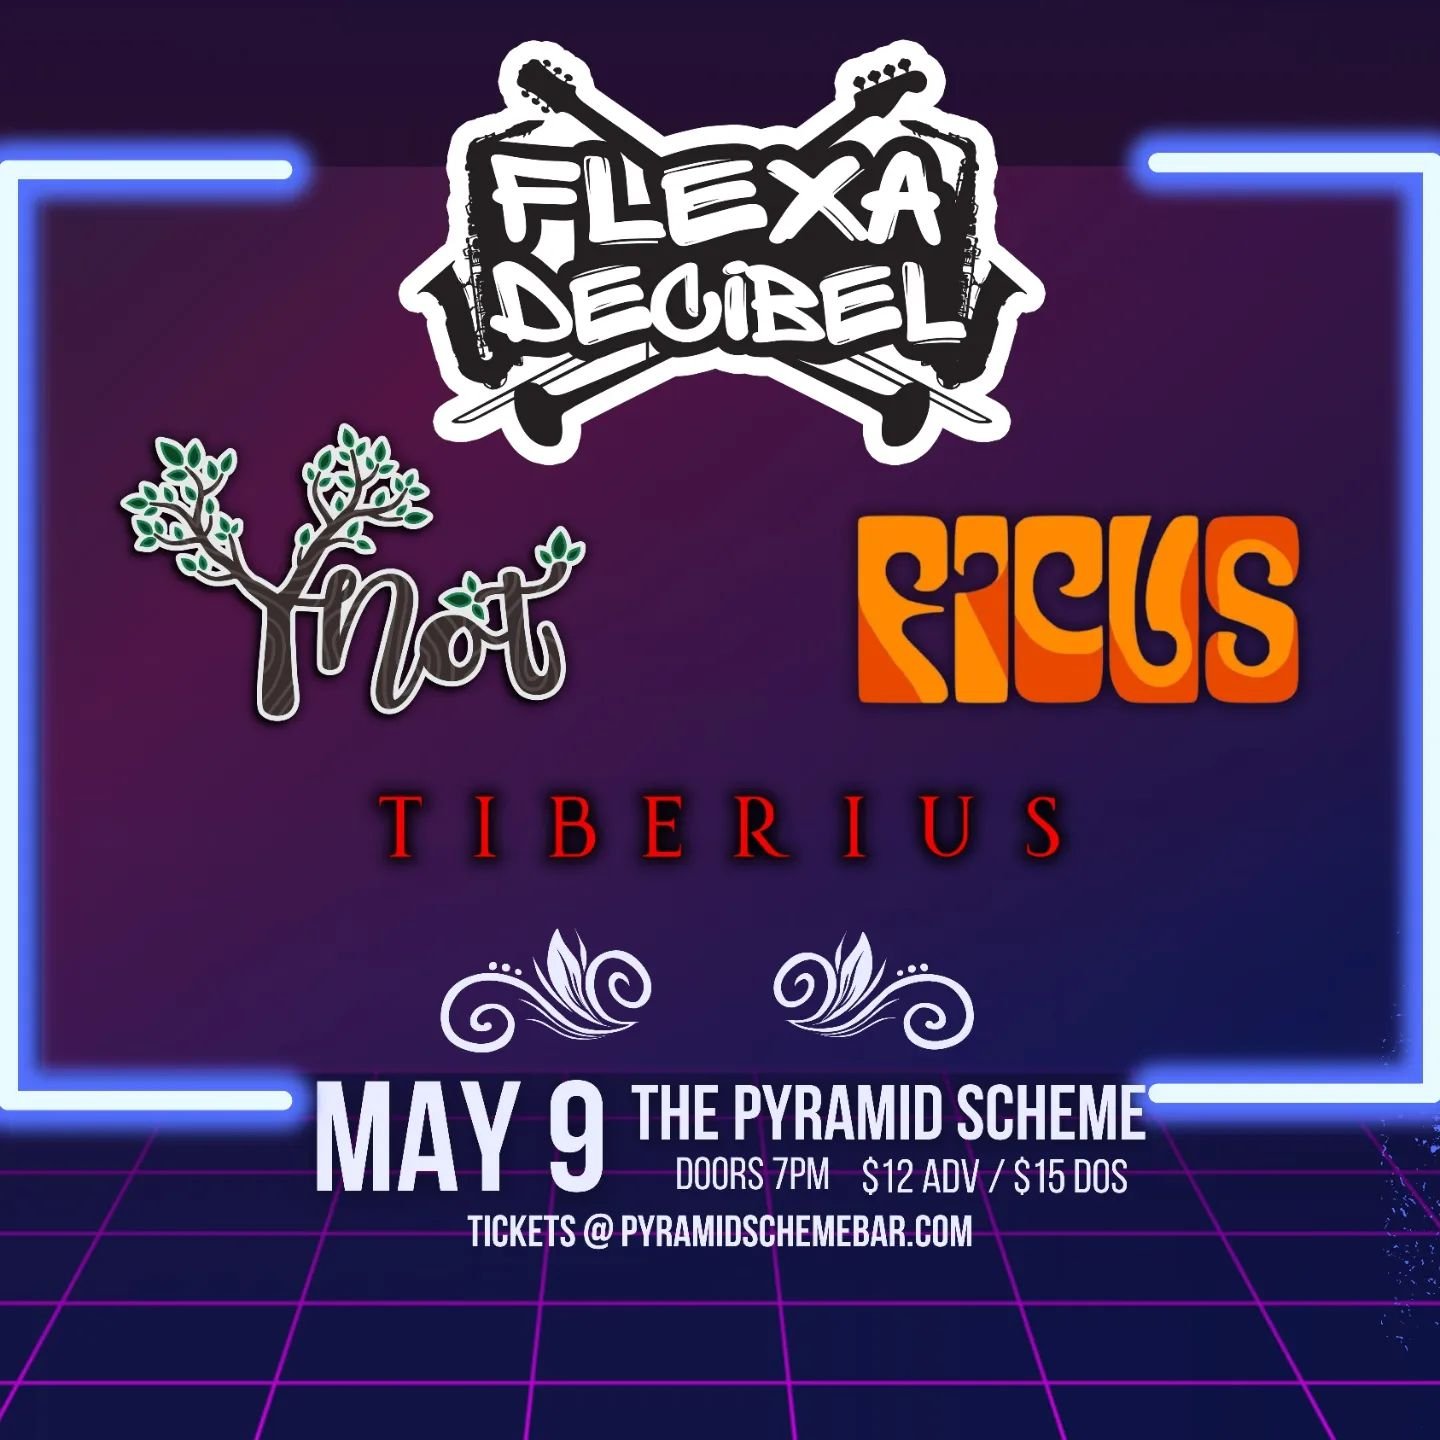 2 weeks away! We are so excited to throw down with @flexadecibel, @ficustheband and @tiberius_band at the Pyramid Scheme on May 9th!!

#grandrapidsmusicscene #grandrapidsmichigan #michiganmusic #pyramidschemegr #ynotplaymusic #flexadecibel #ficus #ti